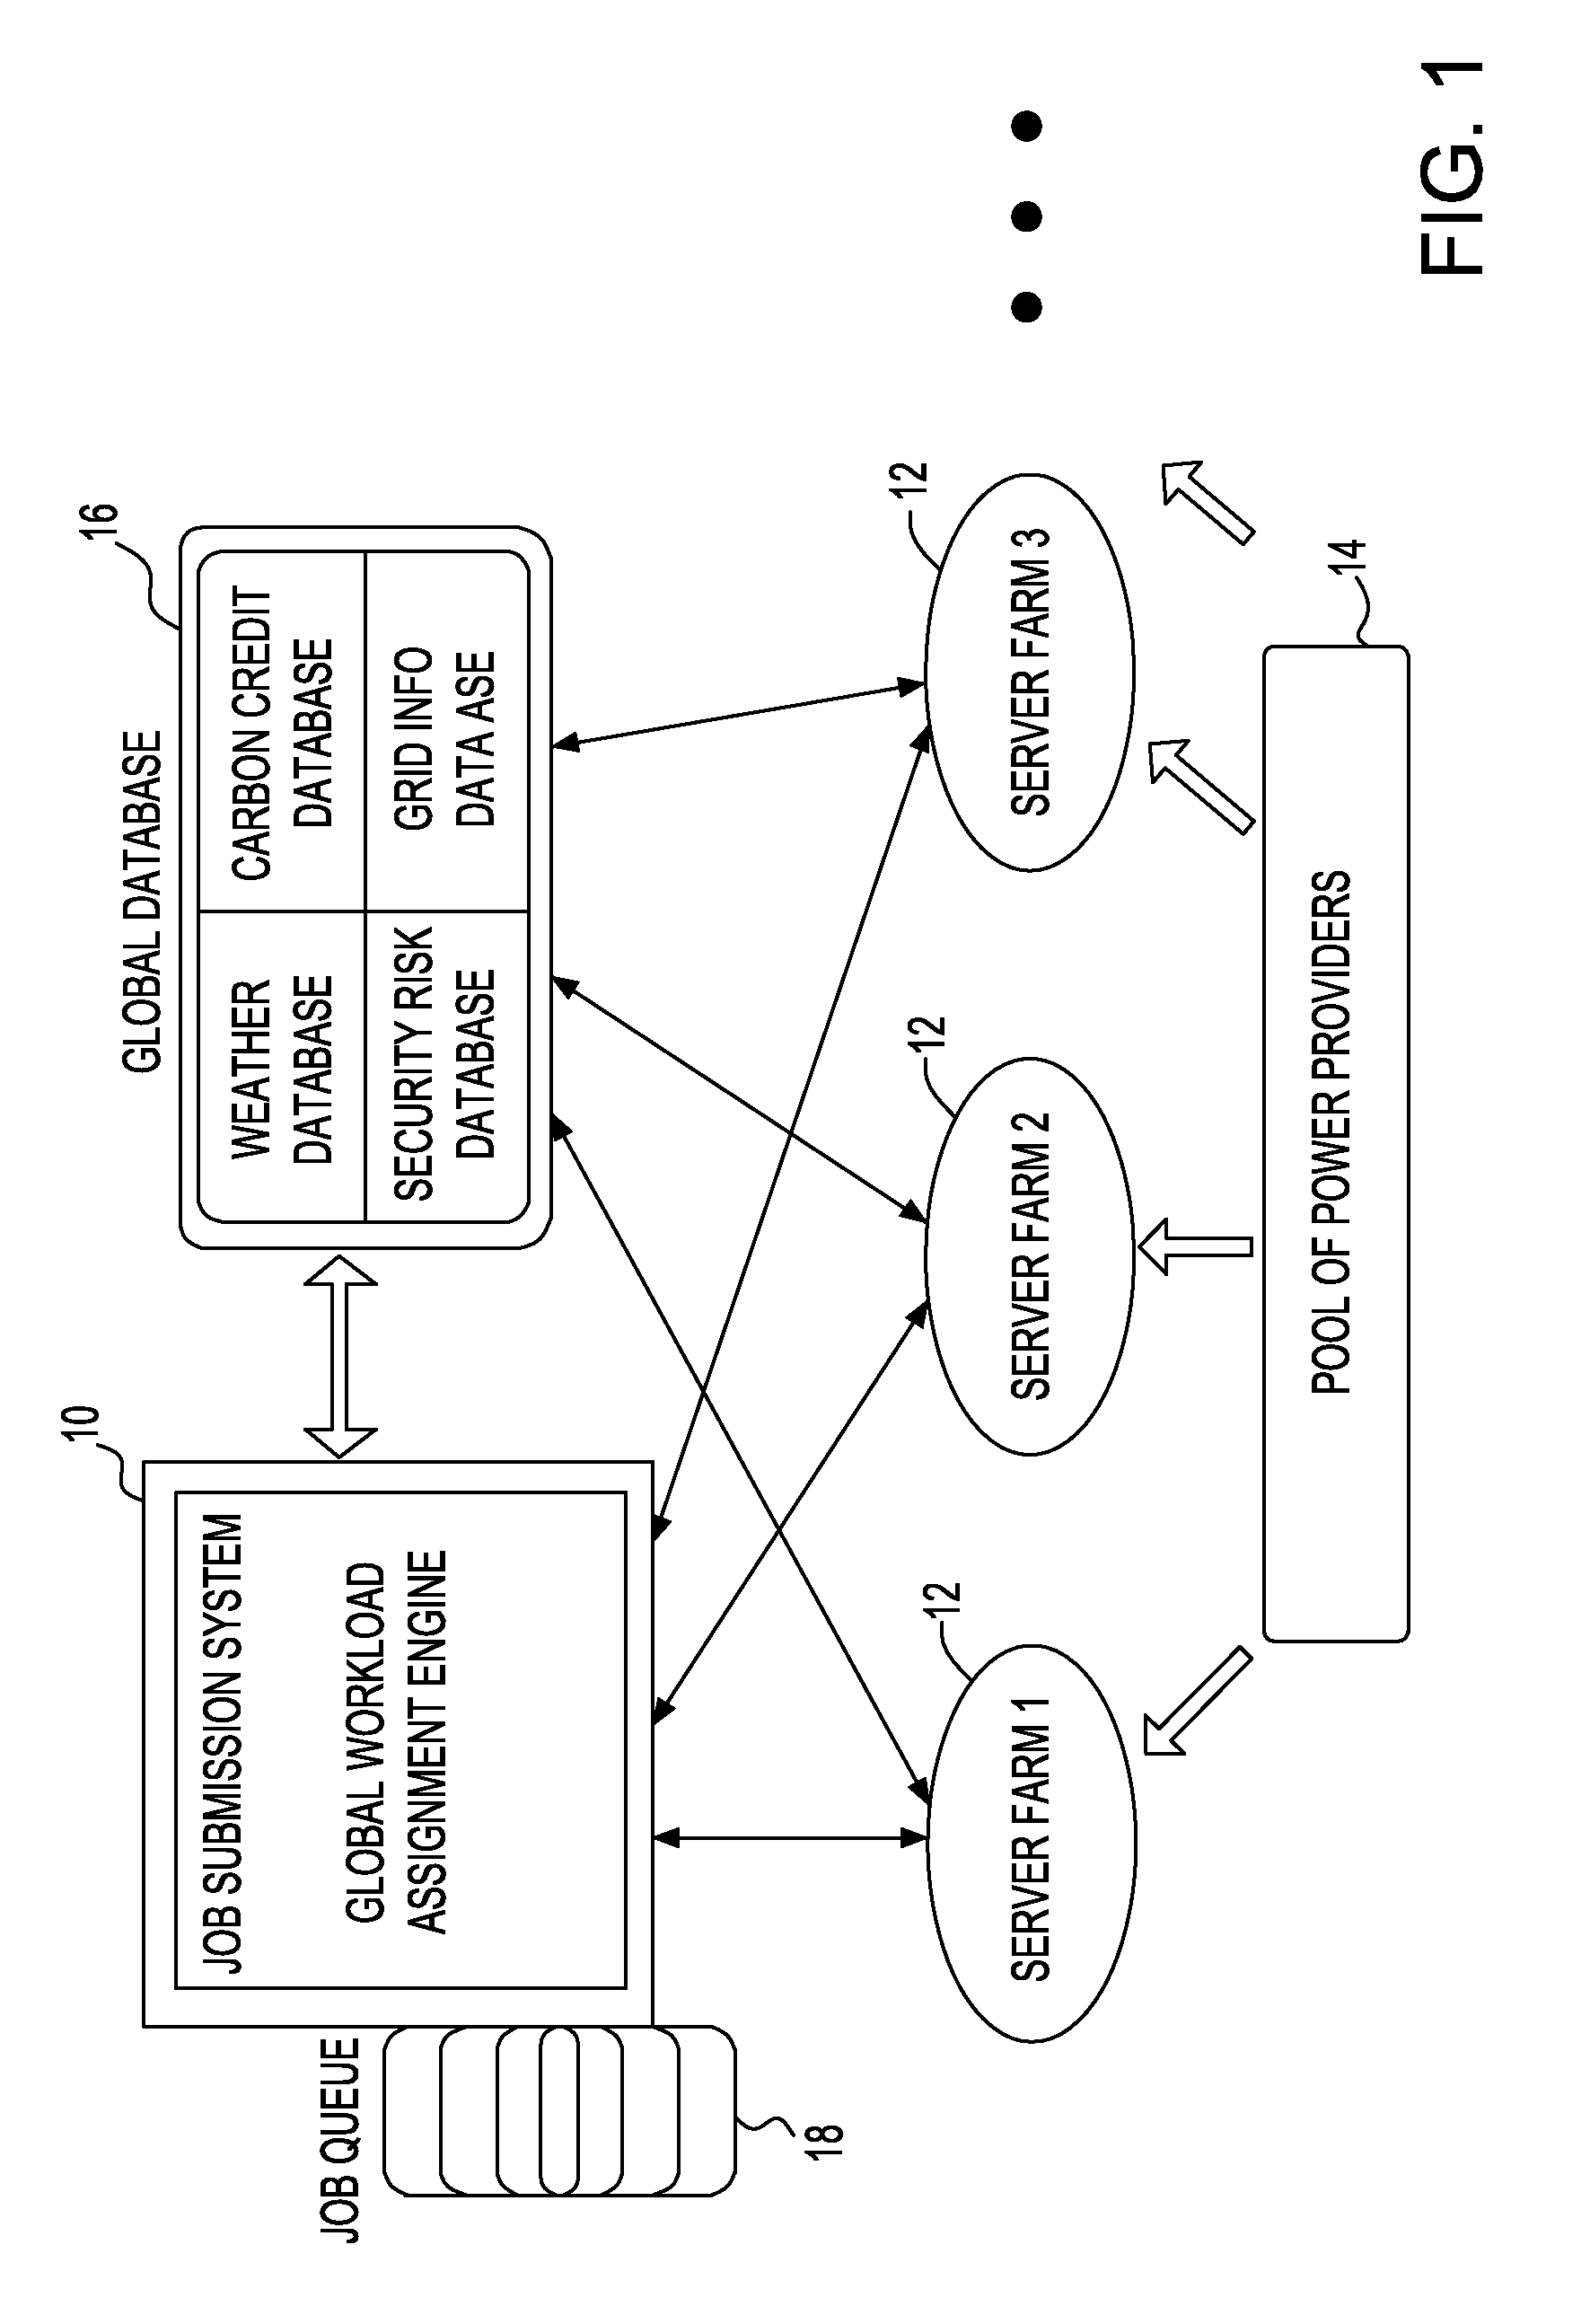 Environmental and computing cost reduction with improved reliability in workload assignment to distributed computing nodes